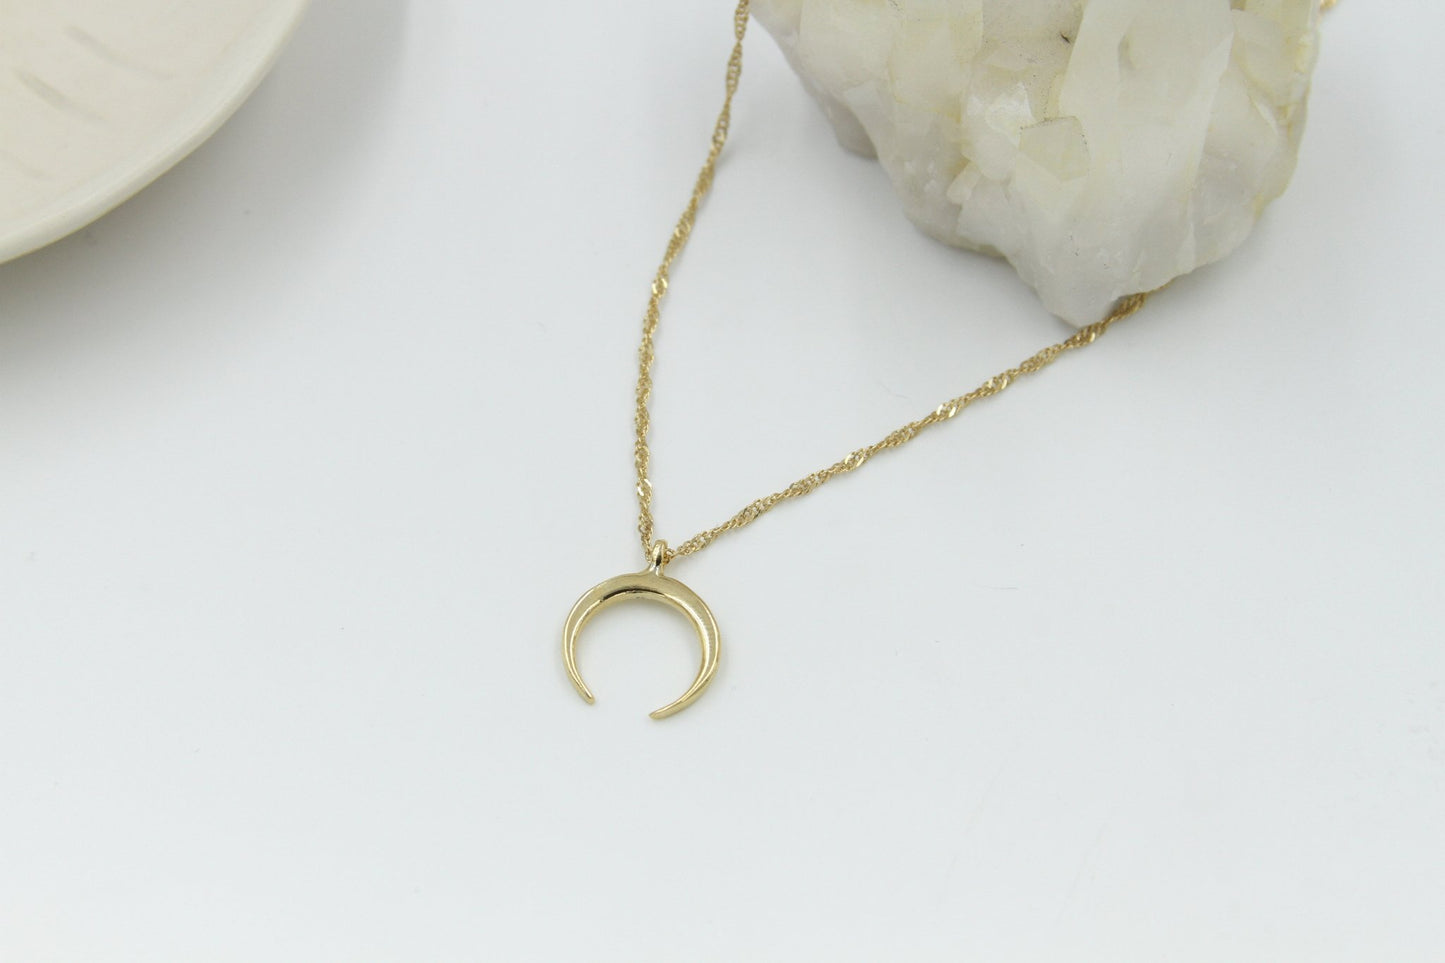 Galilea Crescent Moon Necklace - Sunday Girl by Amy DiLamarraNecklace